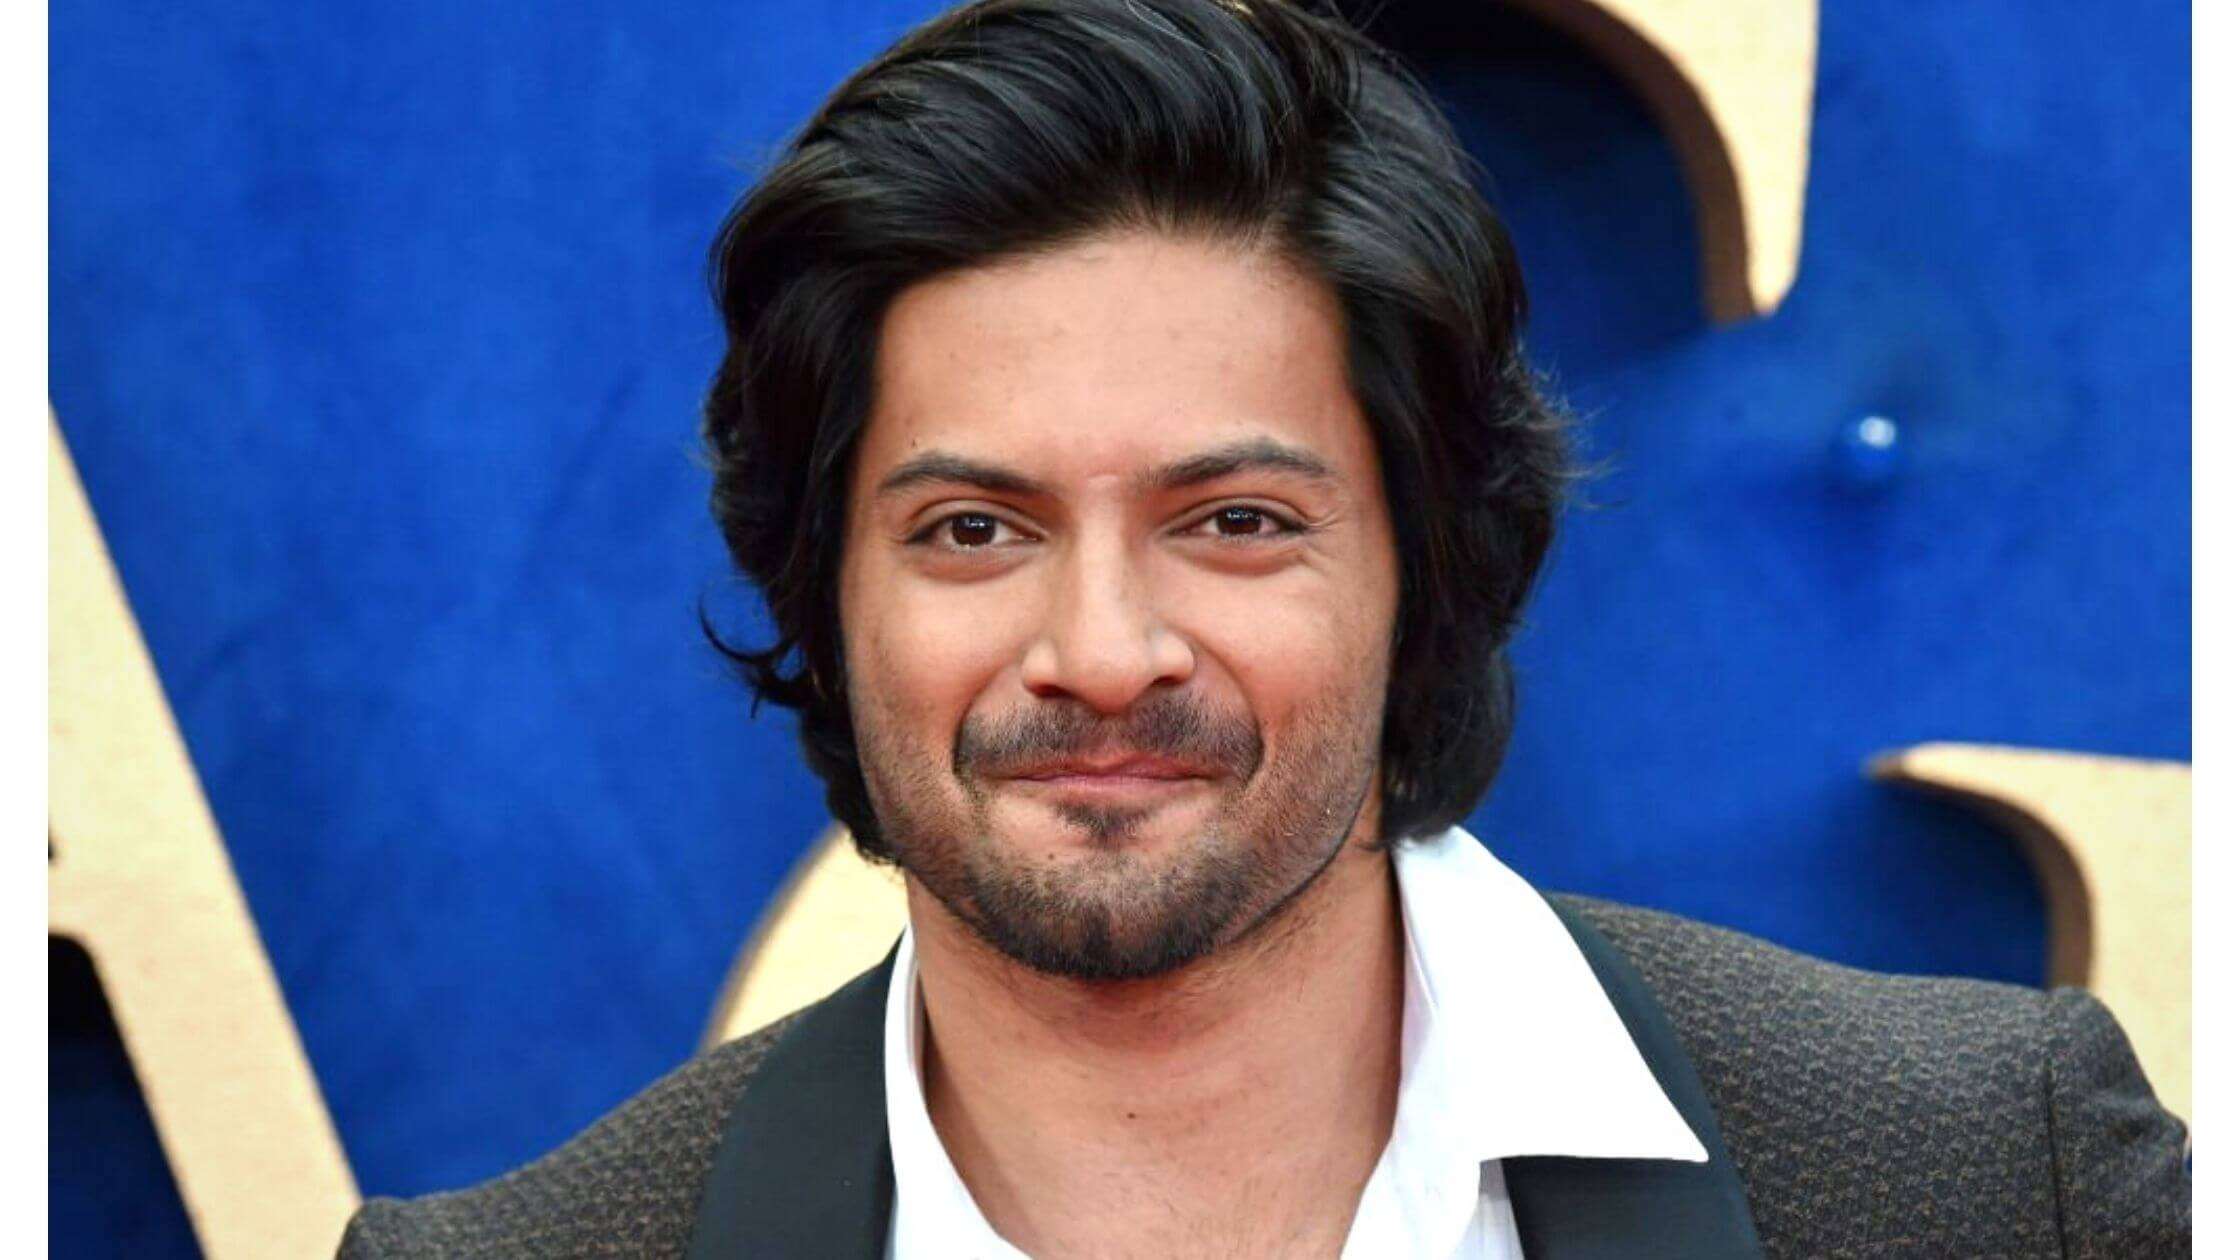 Ali-Fazal-Bio-Career-Age-Wife-Mirzapur-Height-Nationality-Girlfriend-Movies-Relationships-And-More-1_11zon-1_11zon-1